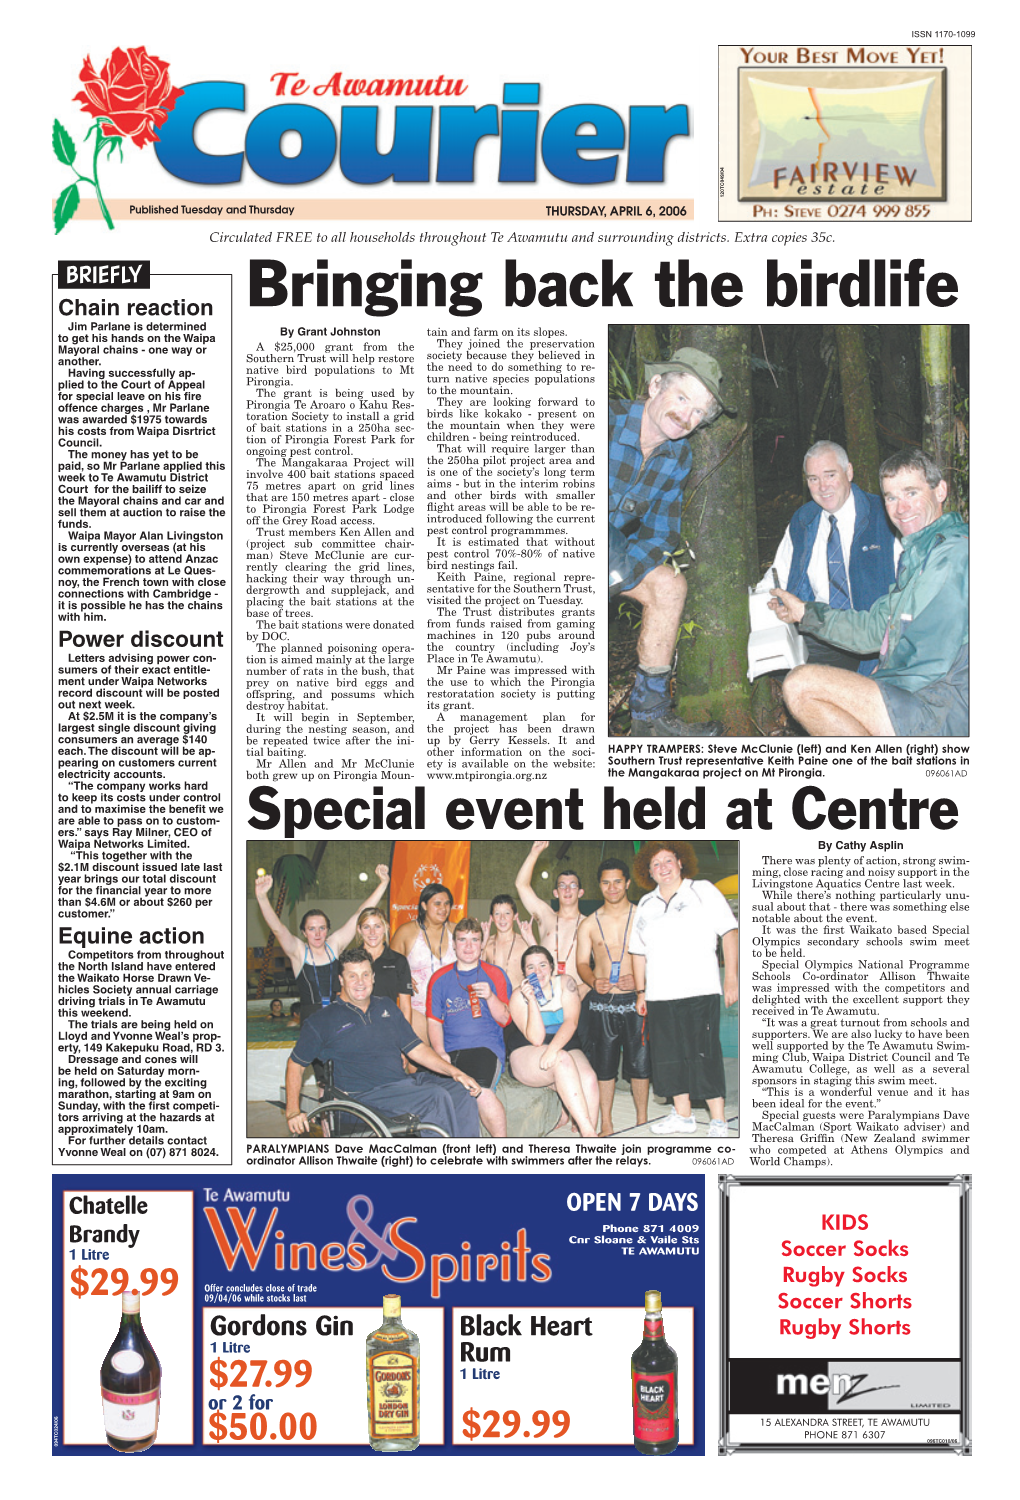 Te Awamutu Courier, Thursday, April 6, 2006 the King (And Queen) of the Castle by Dean Taylor Property